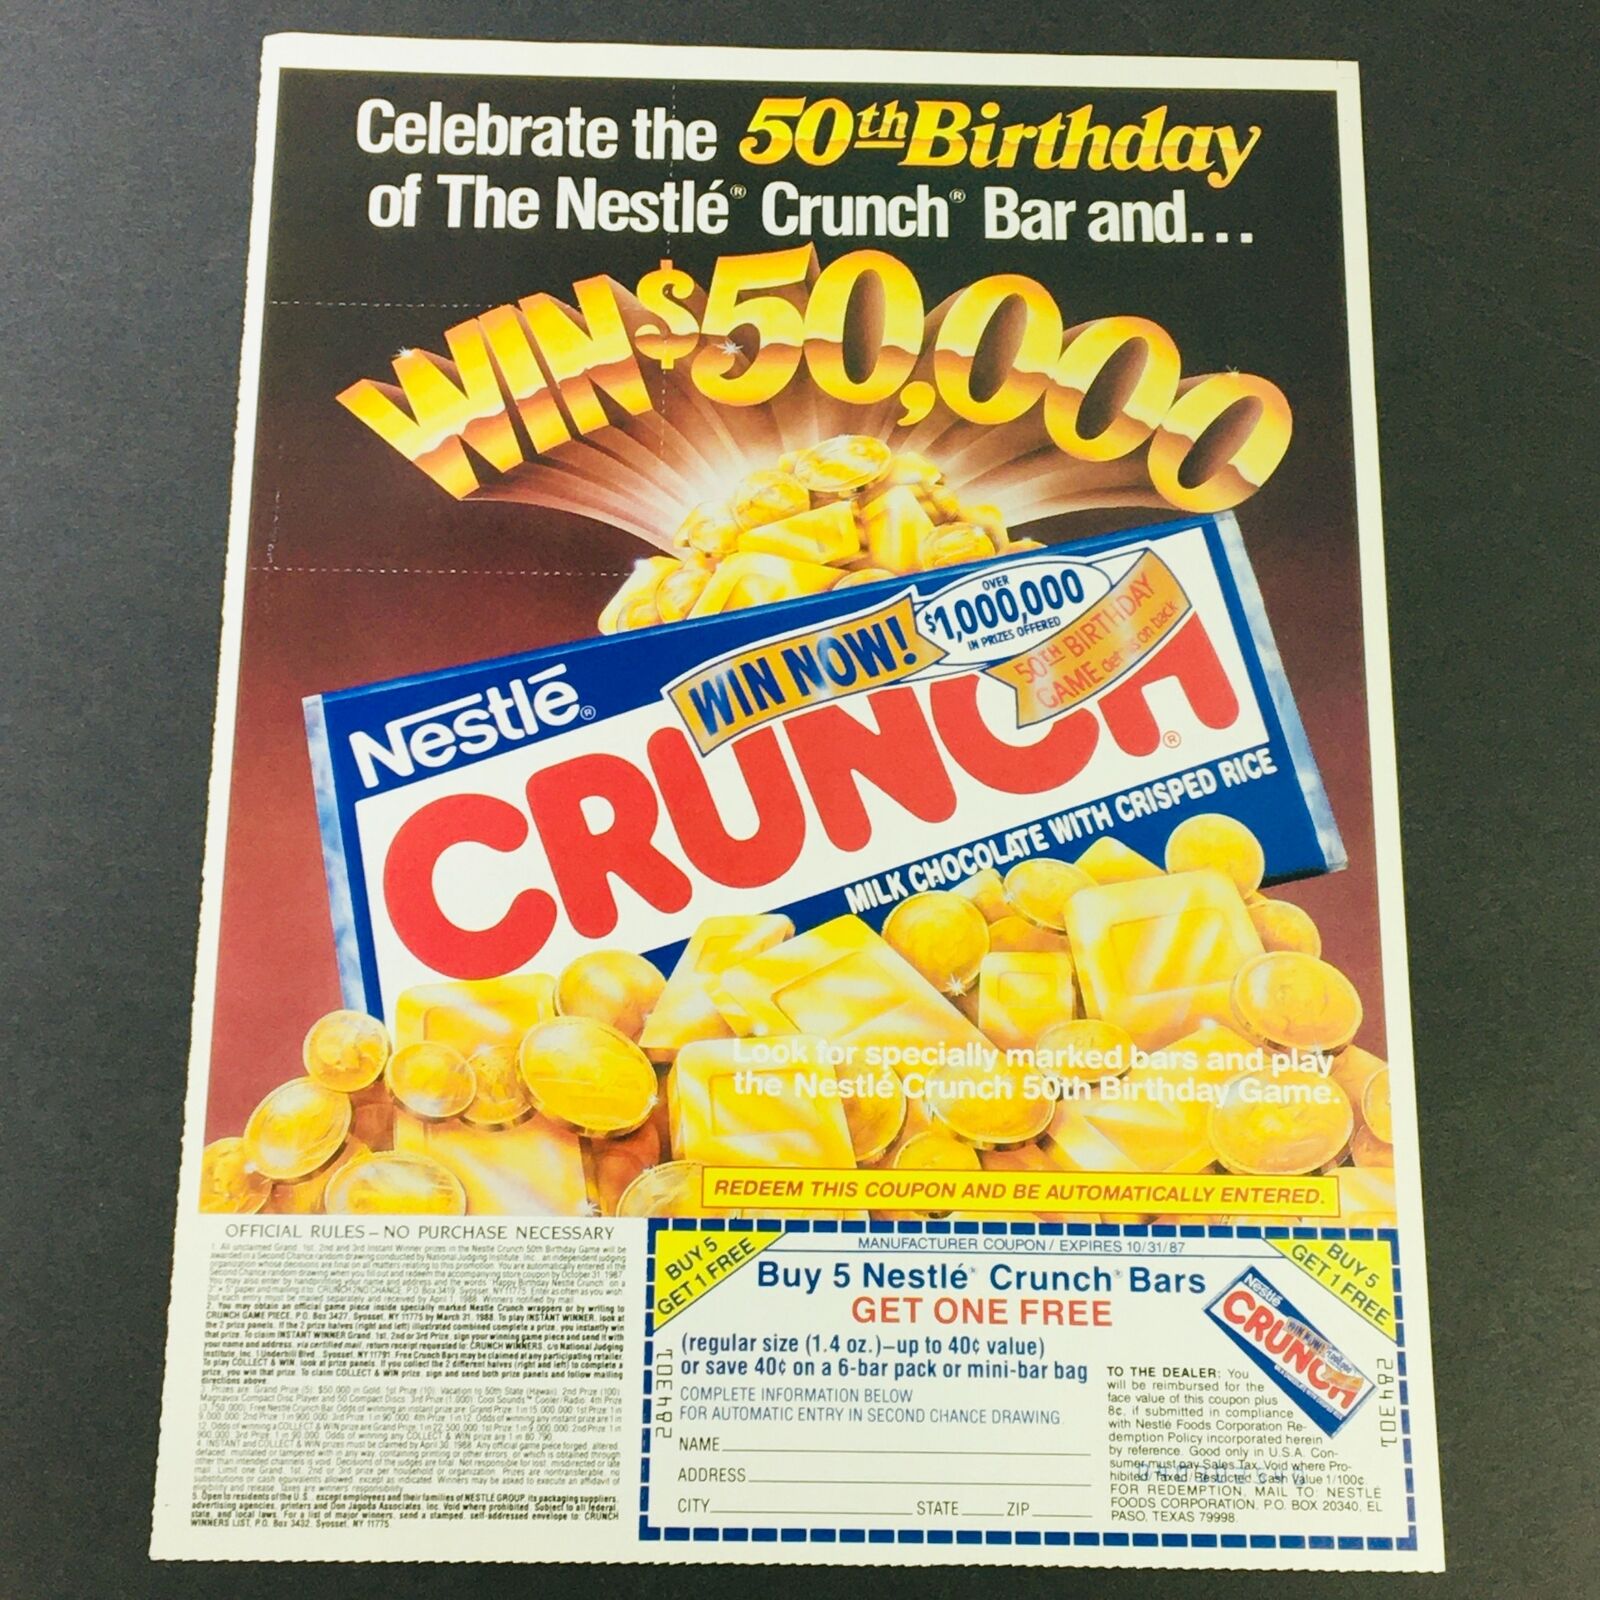 VTG Retro 1987 The Nestle Crunch Bar and 50th Birthday Win $1,000,000 Ad Coupon